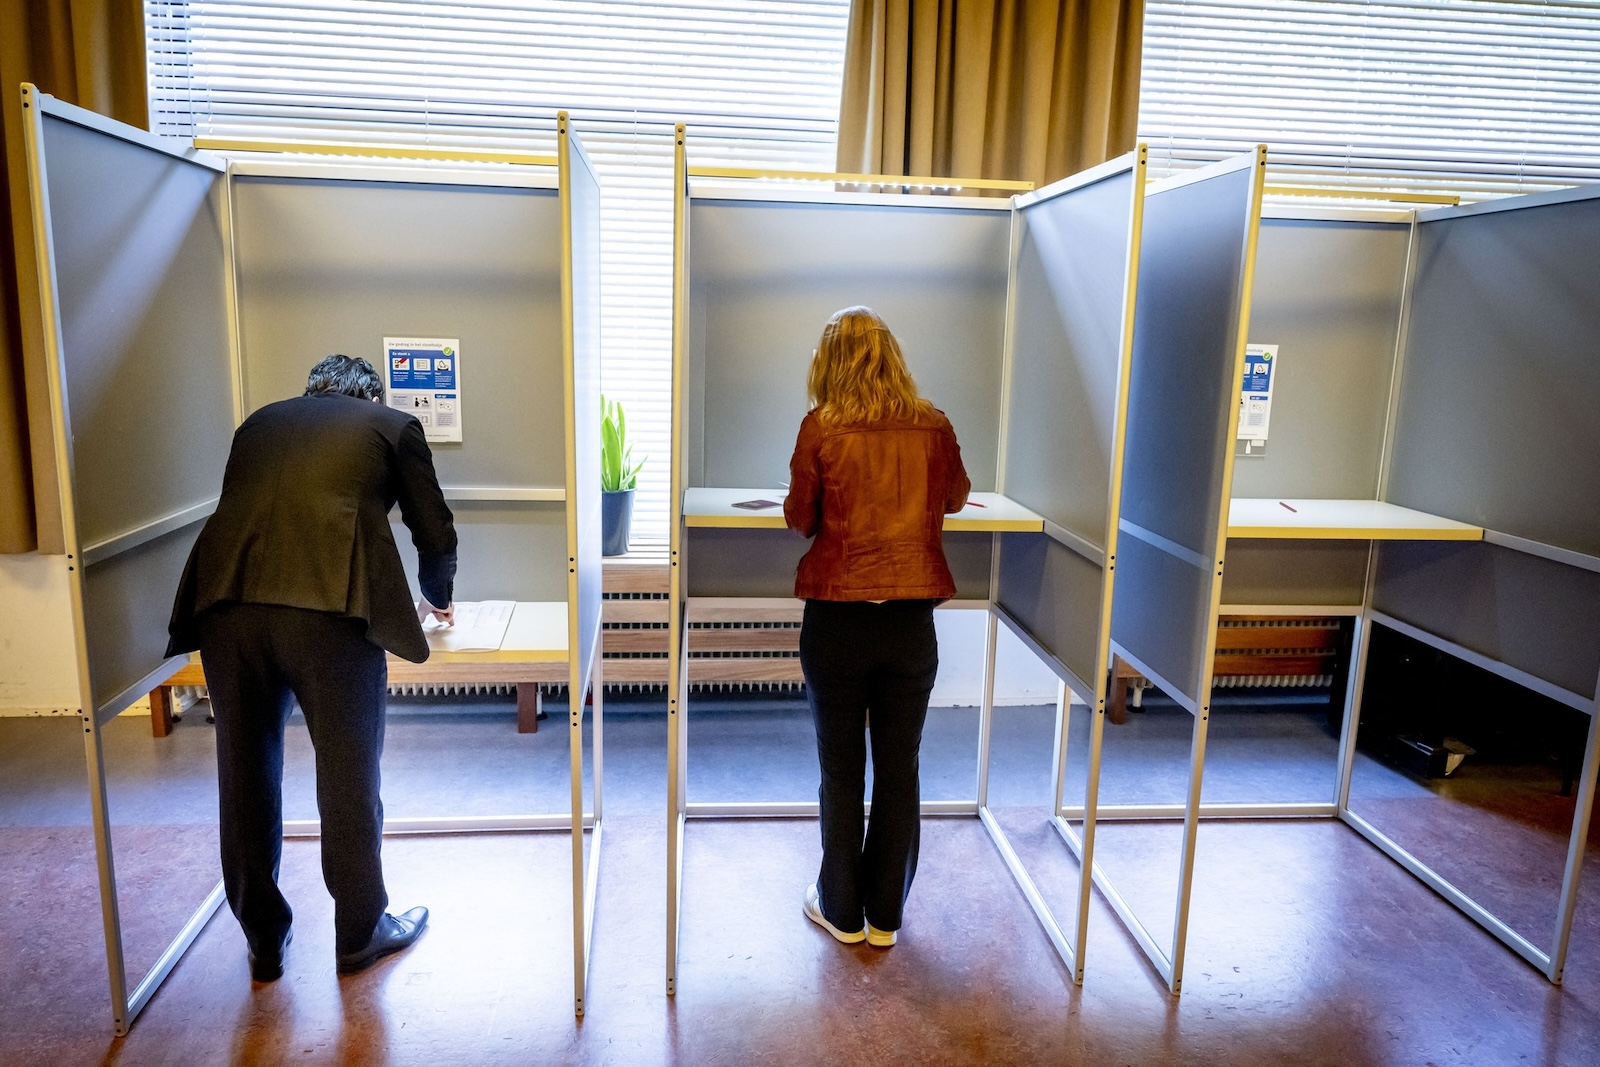 ROTTERDAM - CDA leader Henri Bontenbal casts his vote for the election of Dutch members for the European Parliament. ANP ROBIN UTRECHT netherlands out - belgium out,Image: 879276801, License: Rights-managed, Restrictions: , Model Release: no, Credit line: ROBIN UTRECHT / AFP / Profimedia